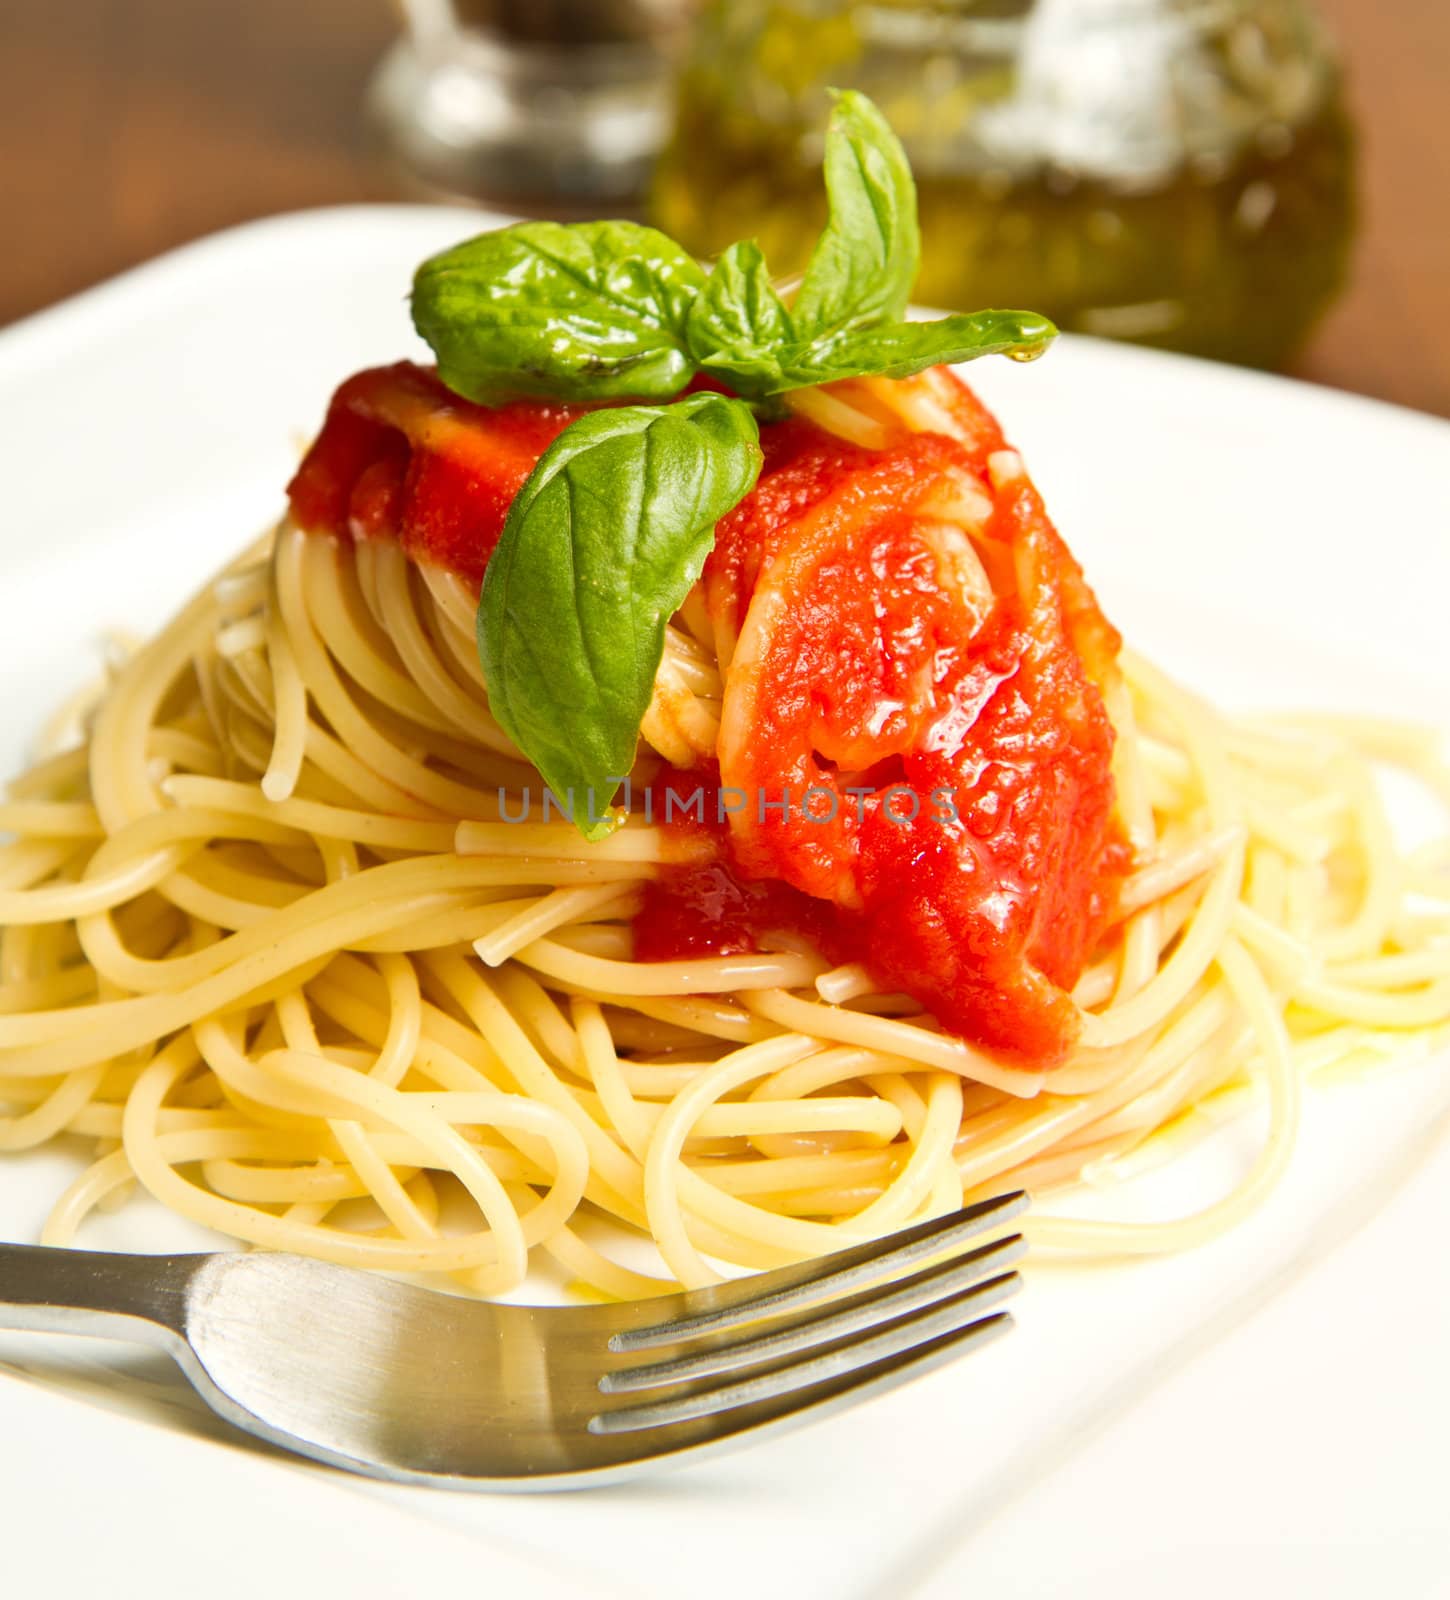 spaghetti with tomatoes sauce and basil by lsantilli